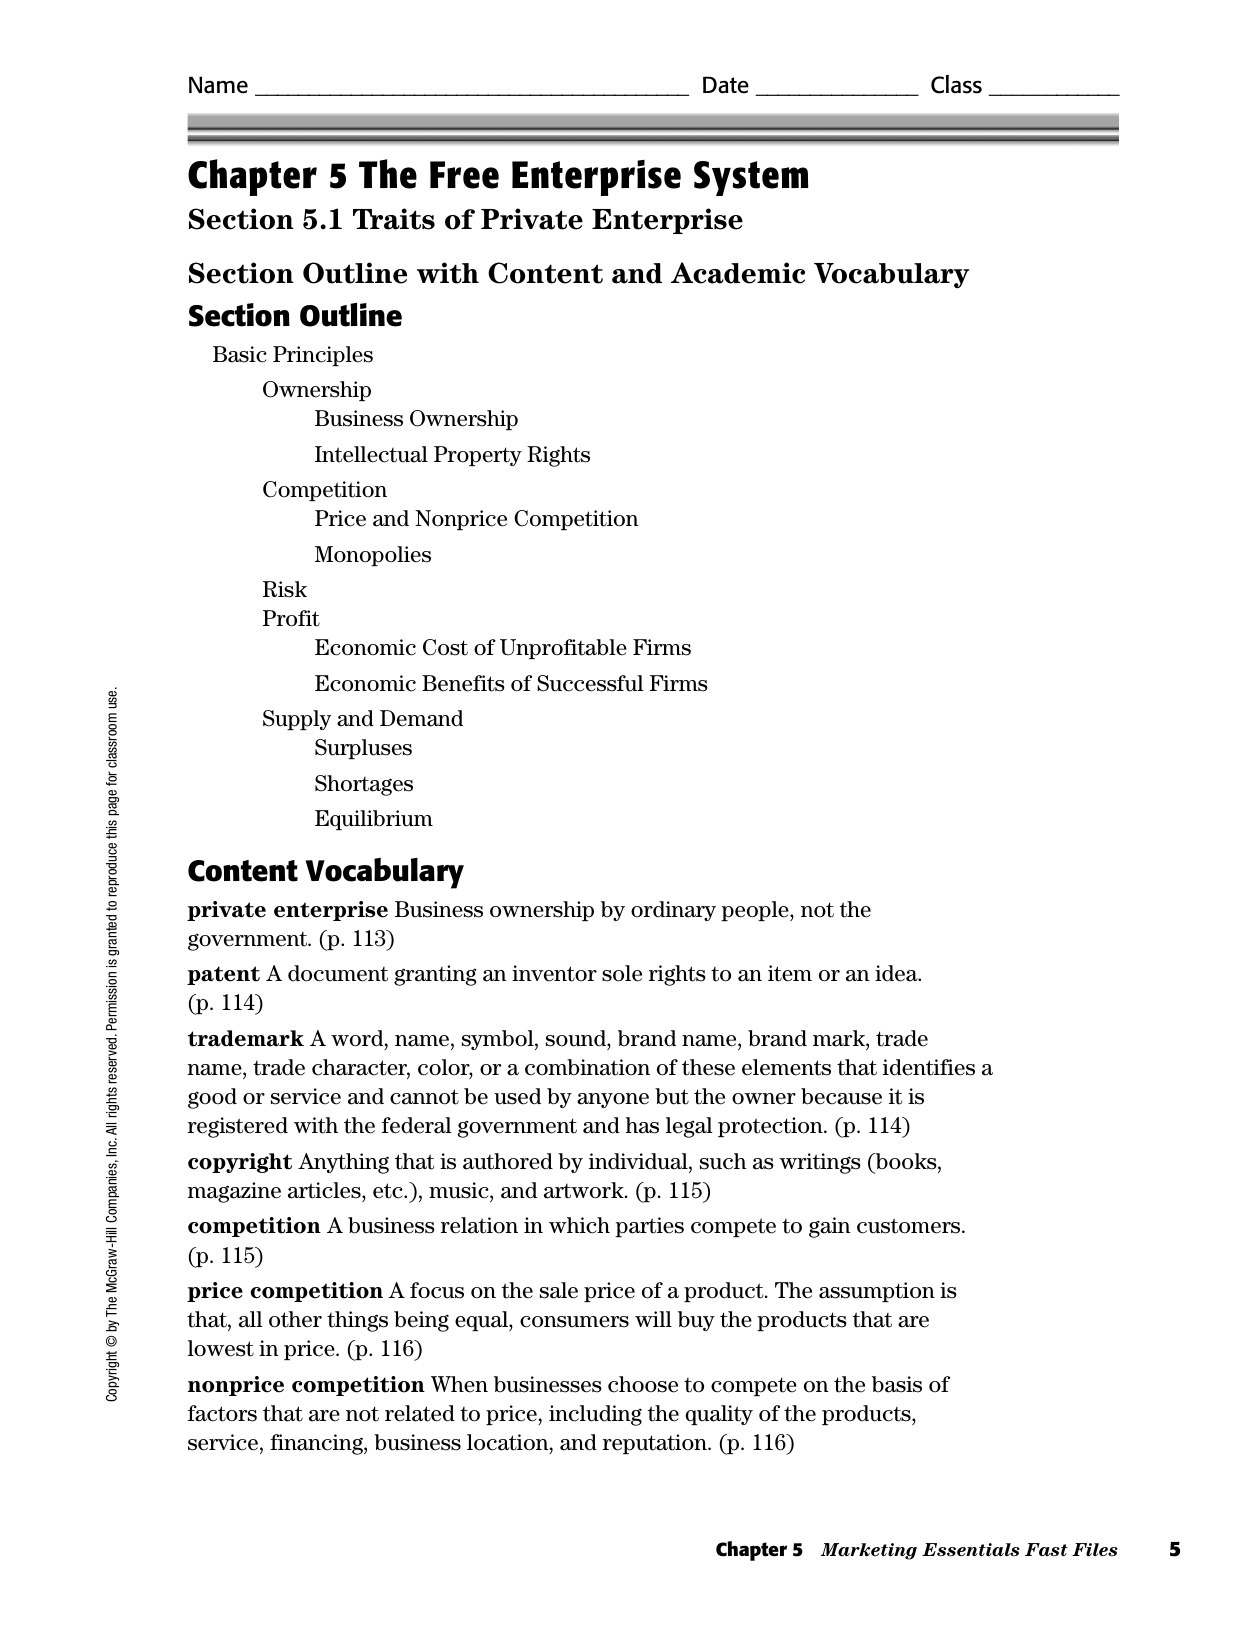 Chapter 5 The Free Enterprise System